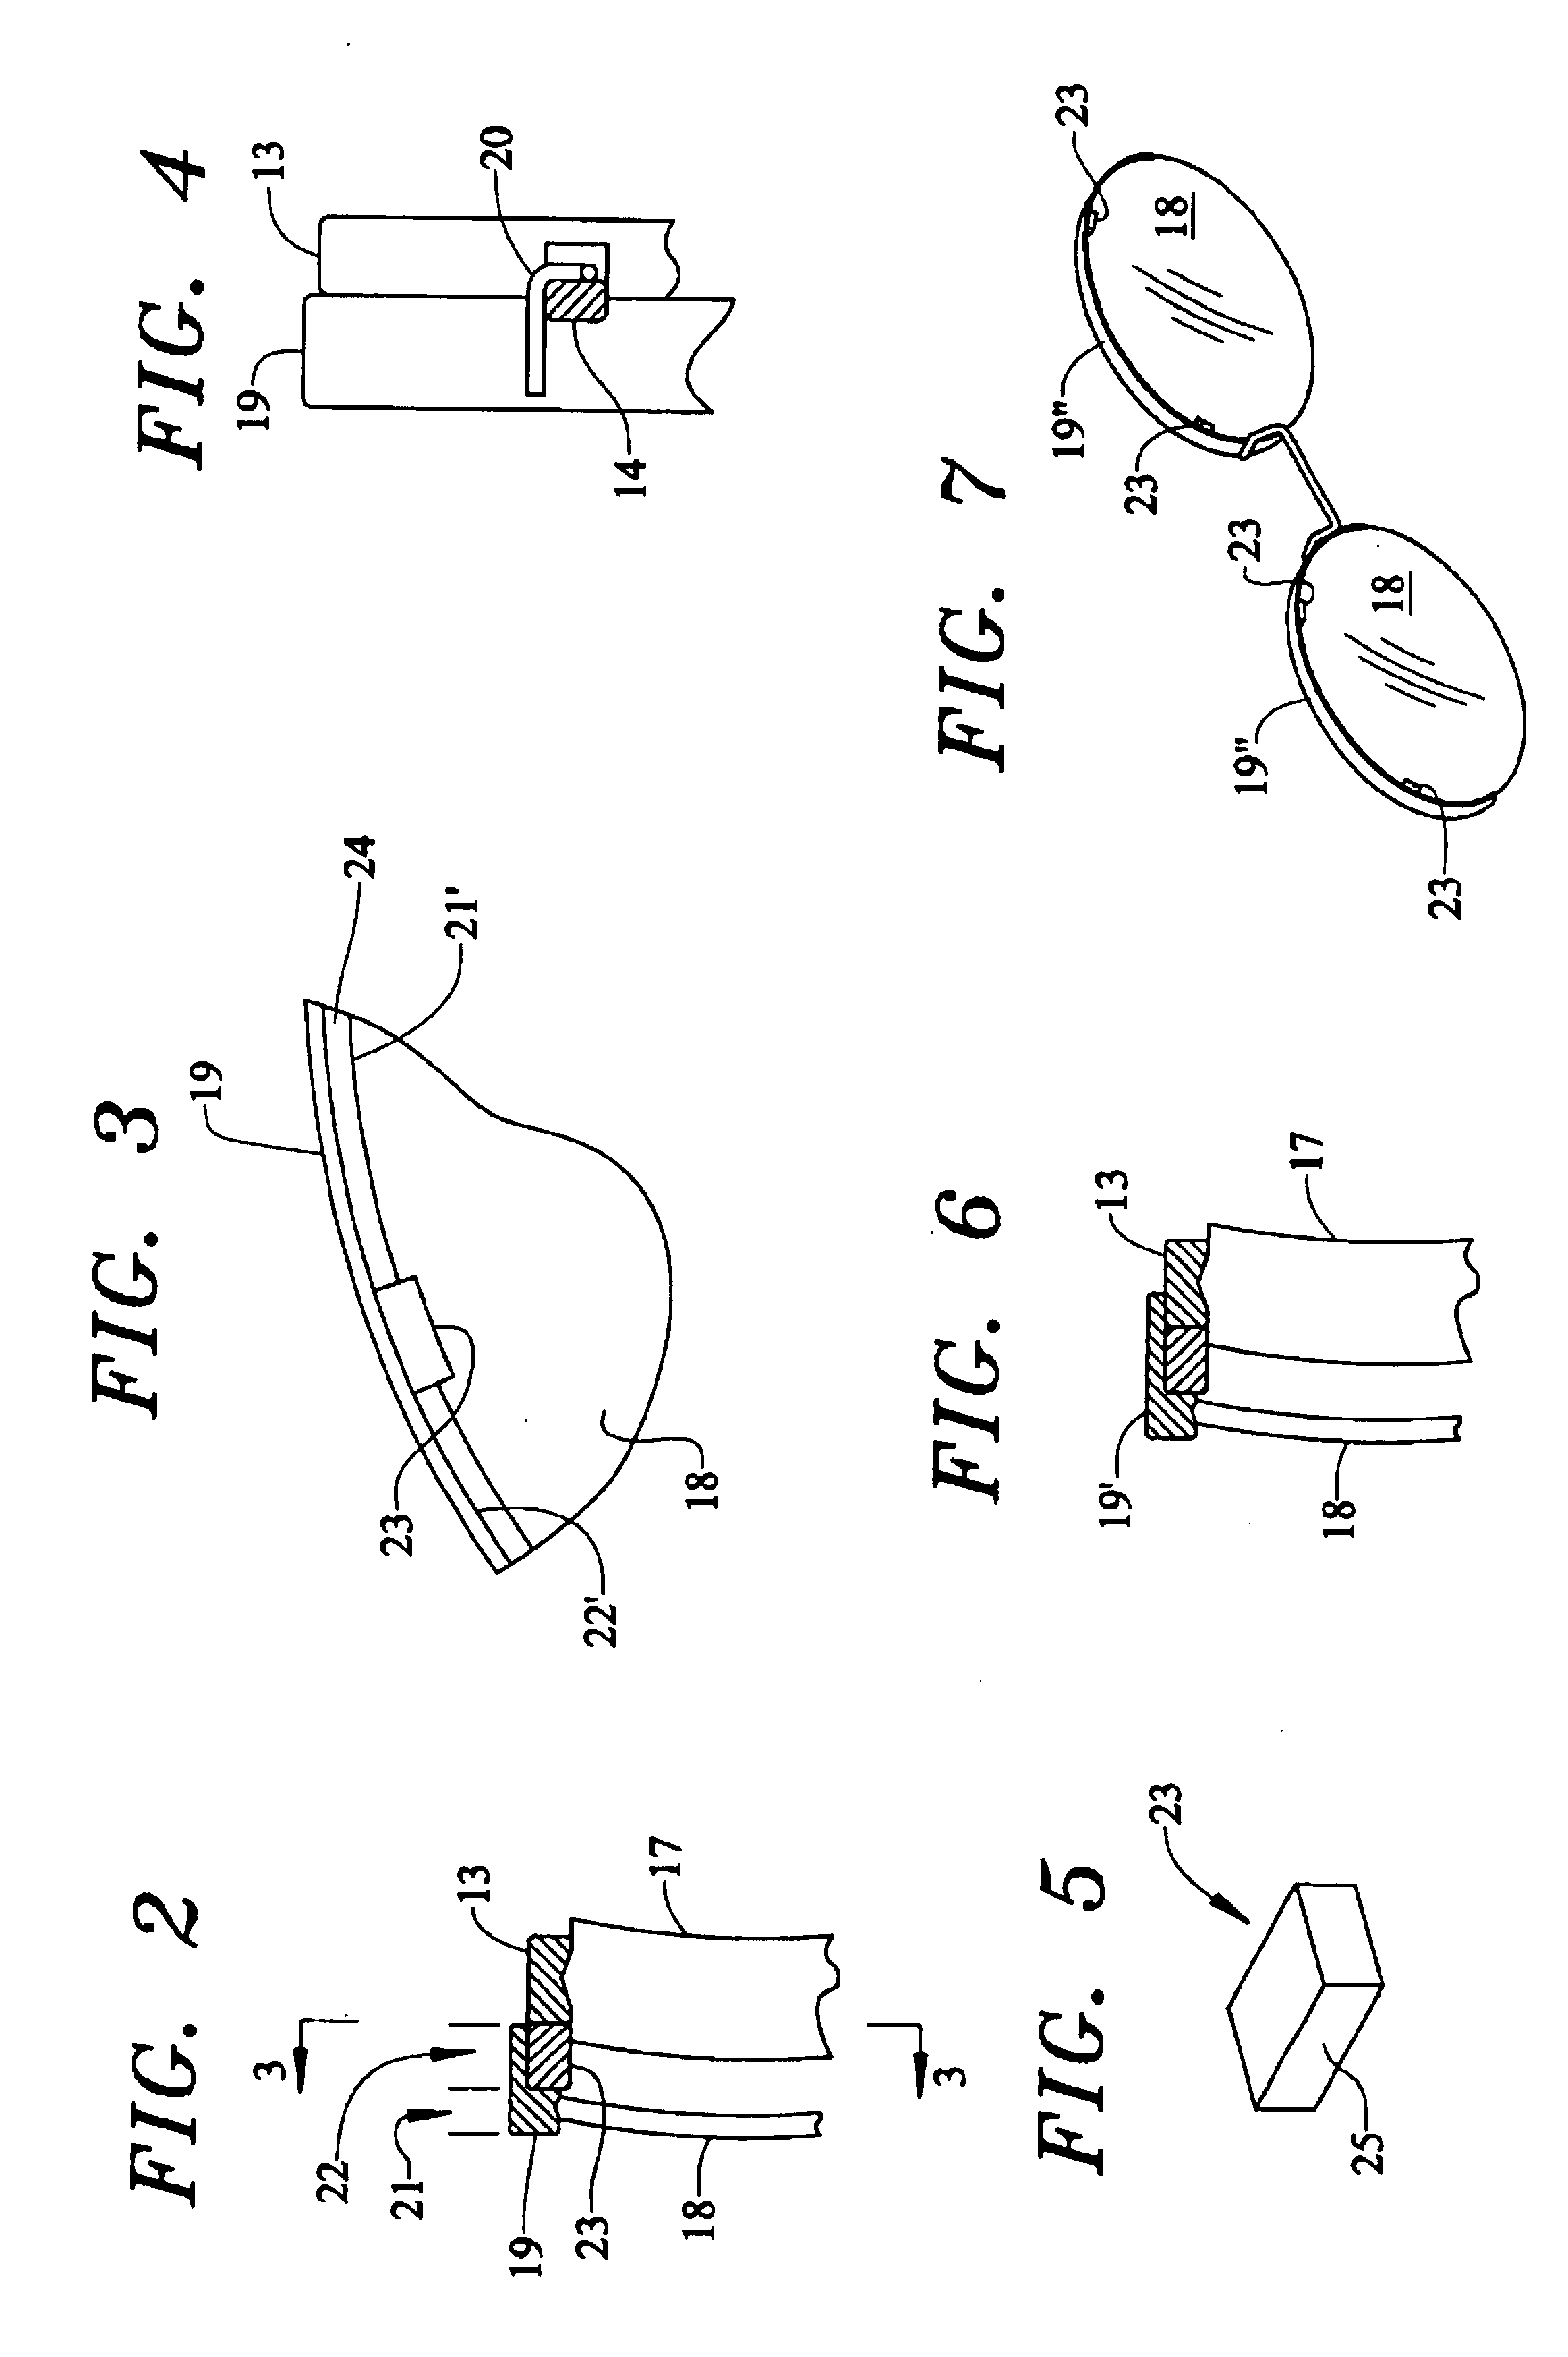 Type of magnetically attached auxiliary lens for spectacles